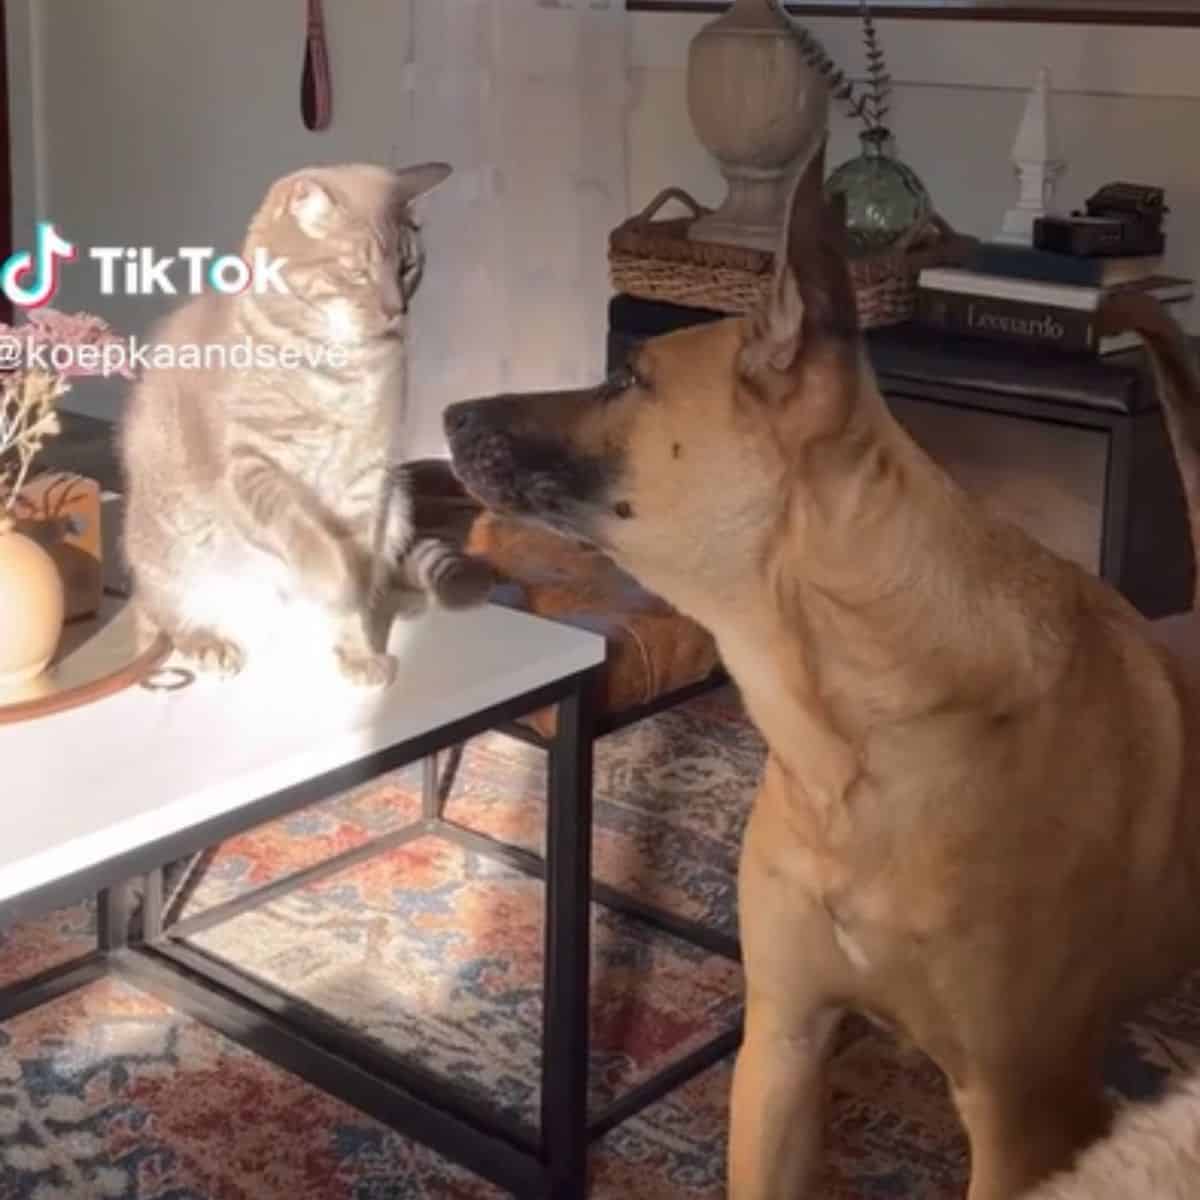 the dog looks at the cat on the table